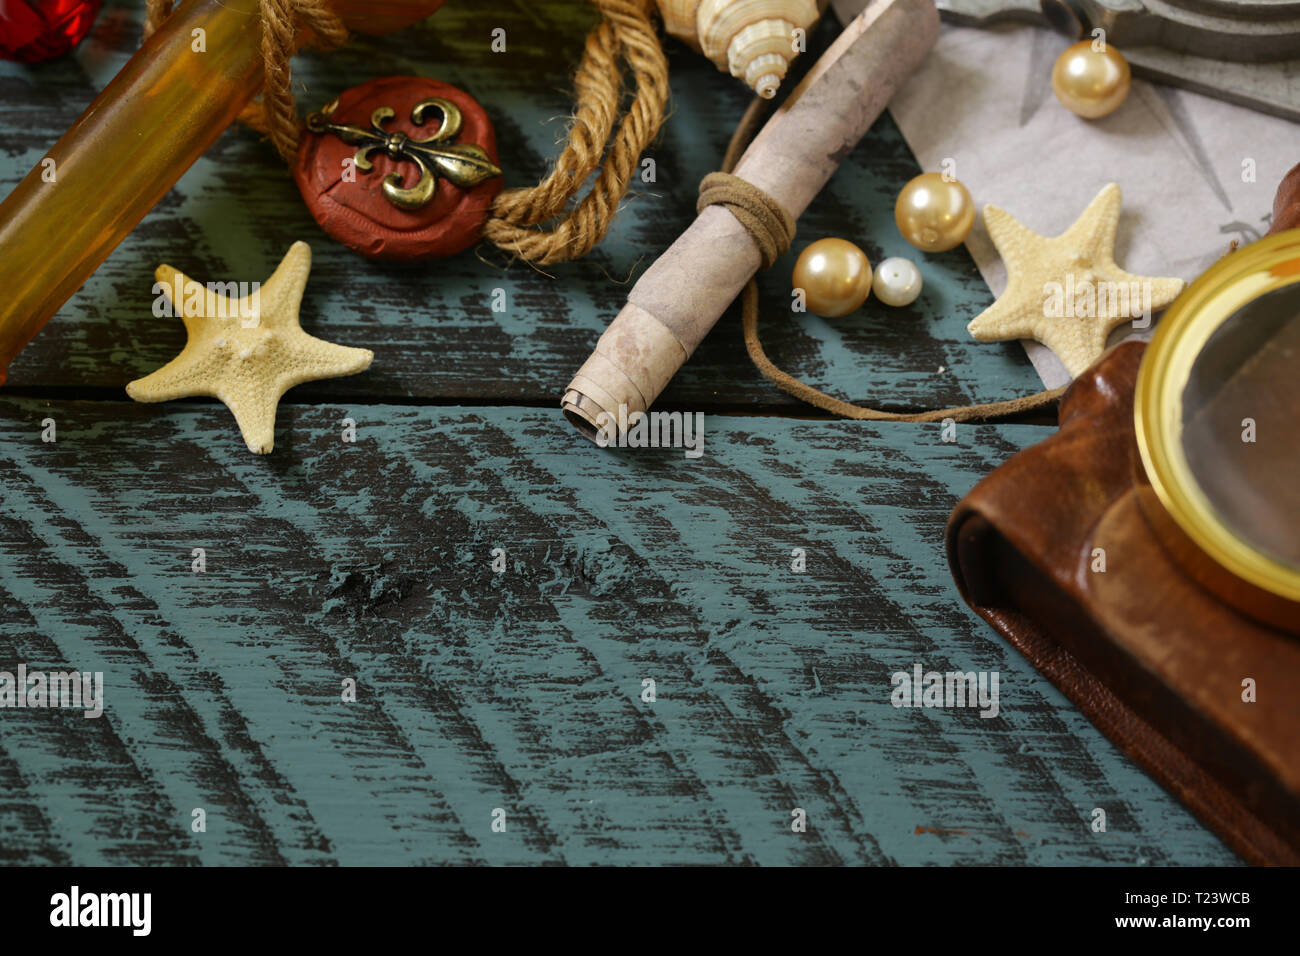 adventure and treasure hunt concept on wooden background Stock Photo - Alamy